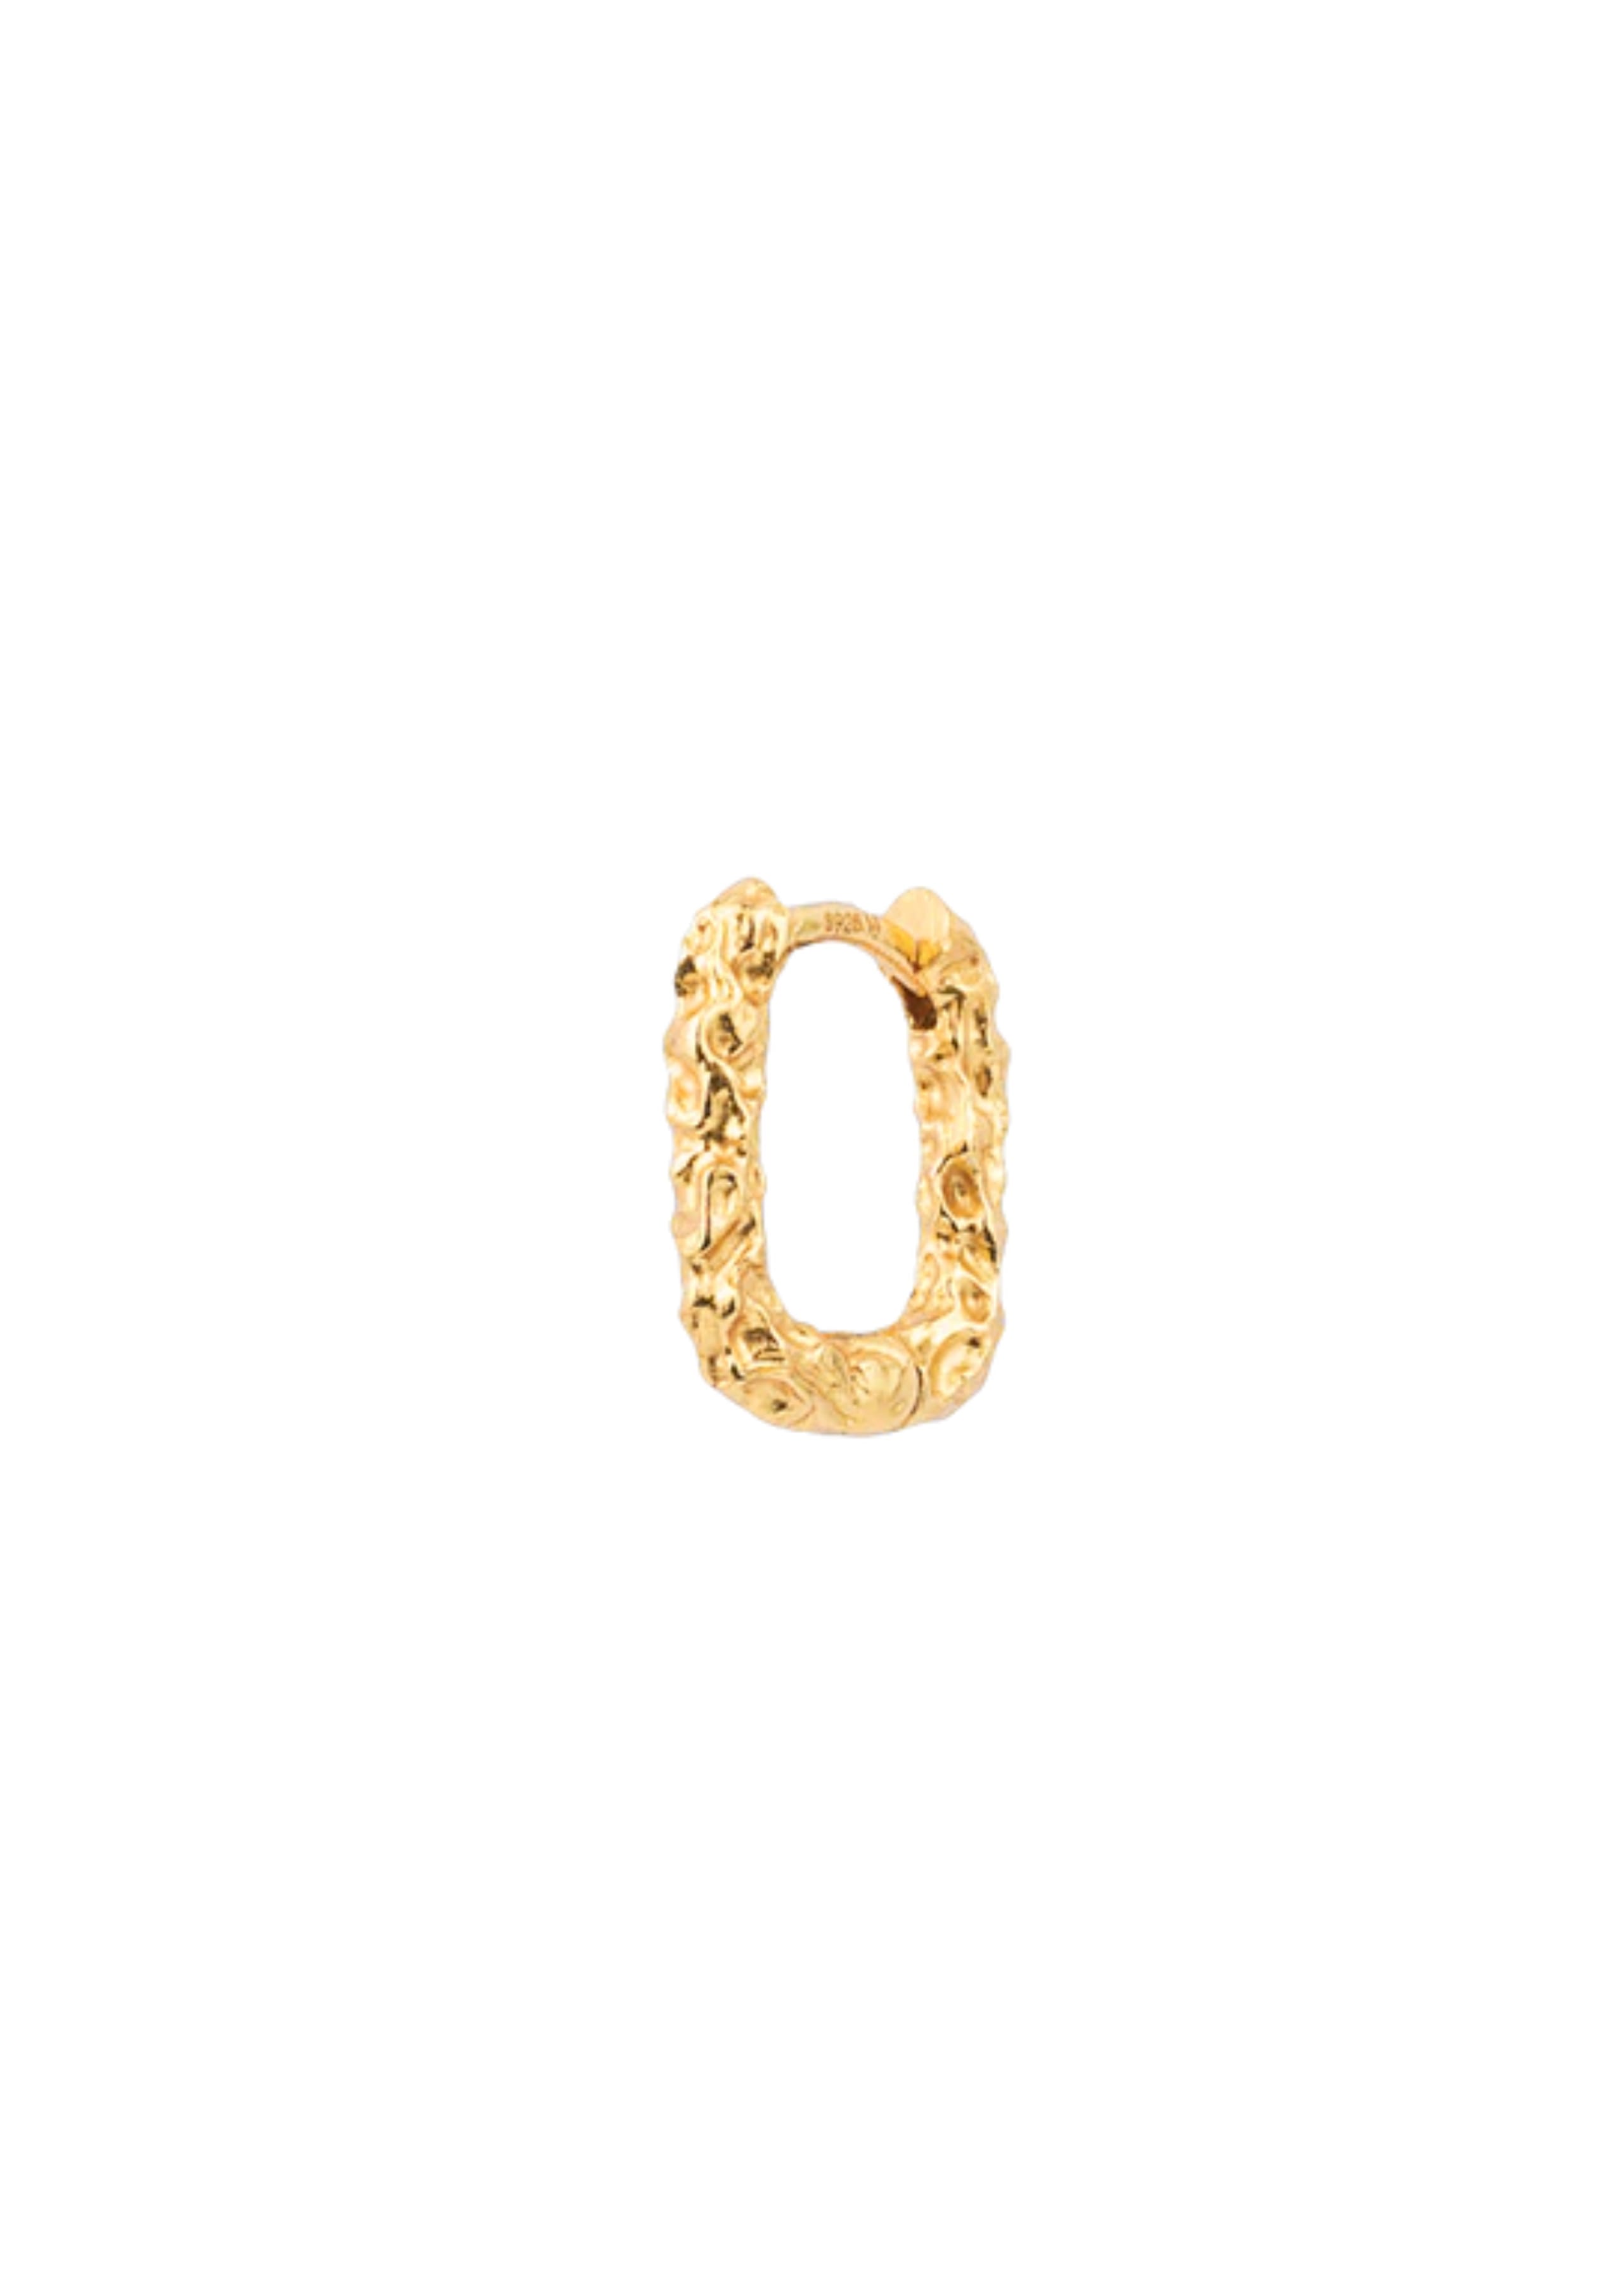 House of Vincent - Boucle d'oreille - Riddle Hoop Earring - Gold